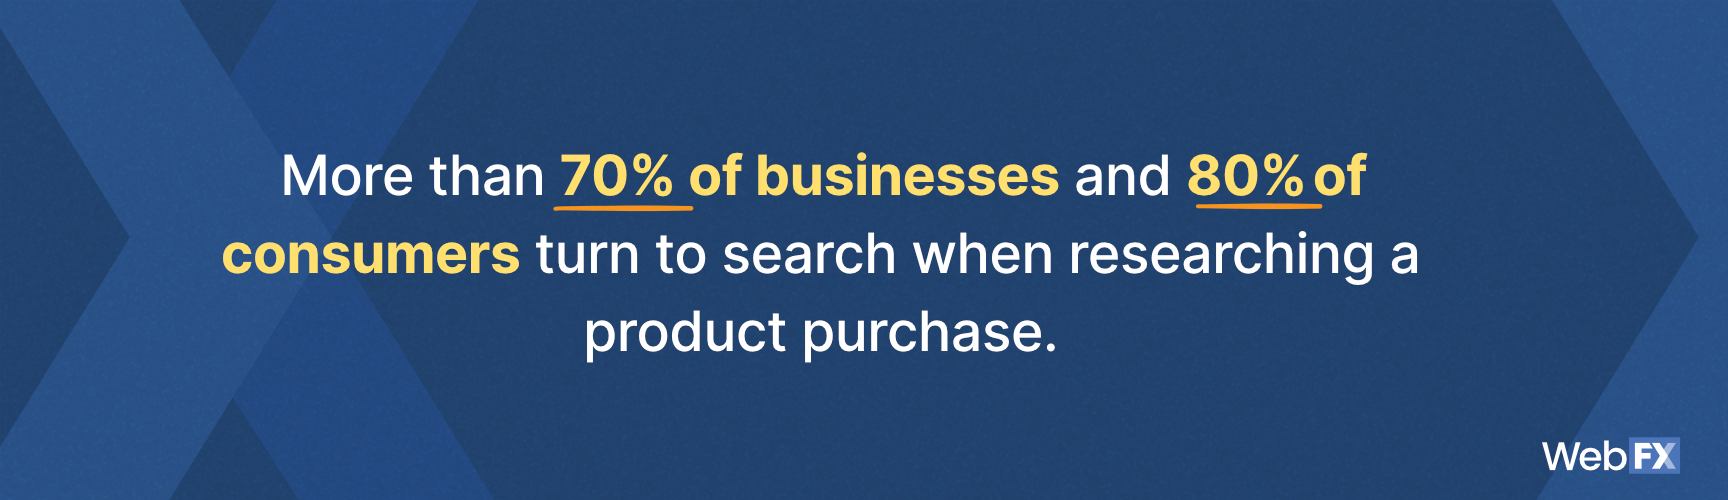 A statistic on search behavior of businesses and consumers